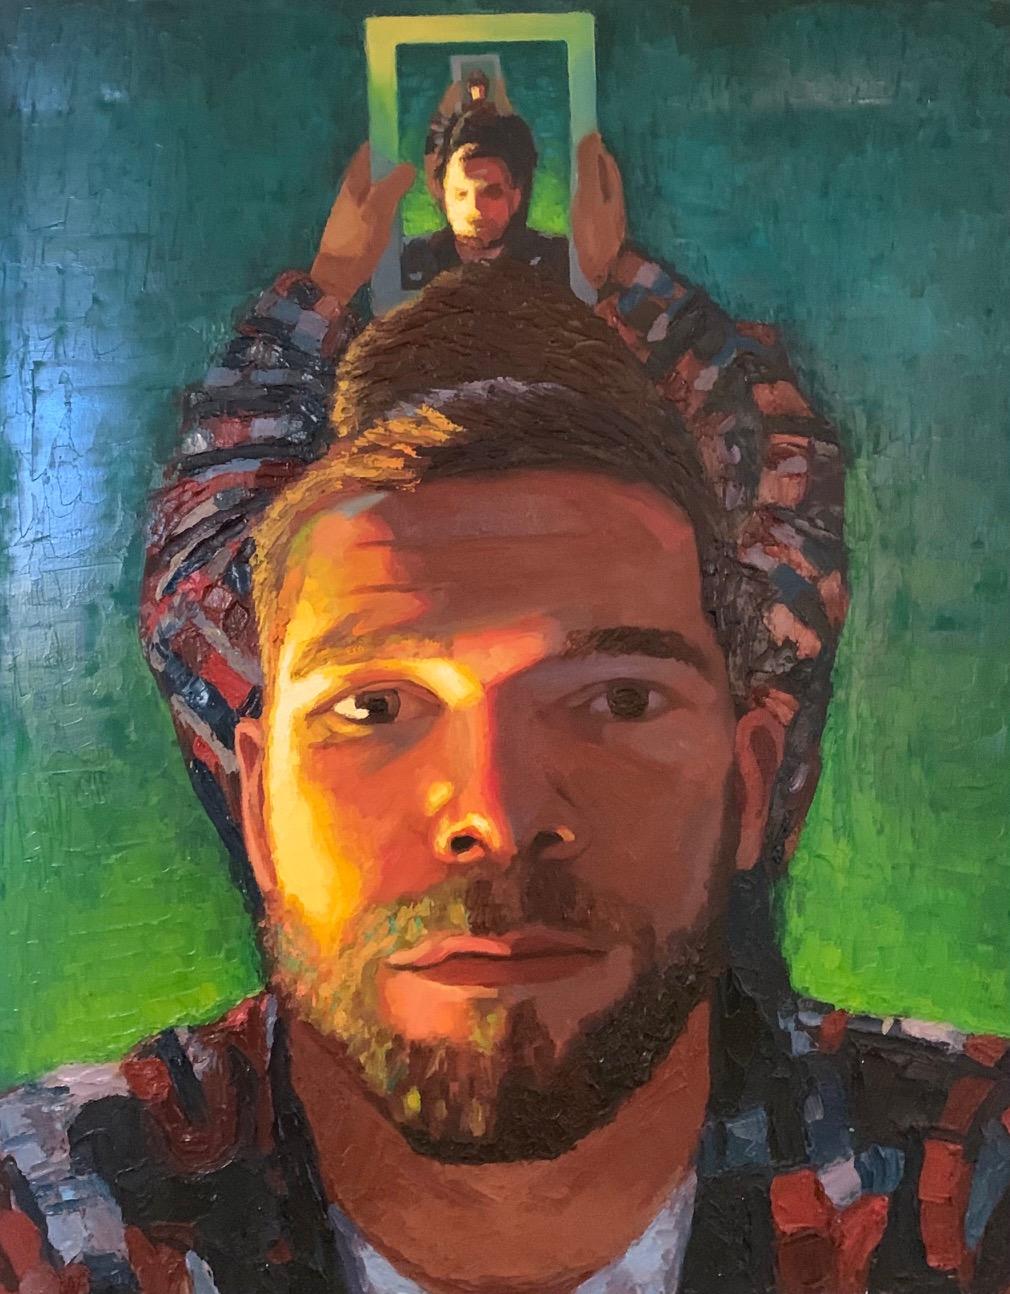 "Looking in the mirror" oil on canvas 30"x24" by Scott Jacobs